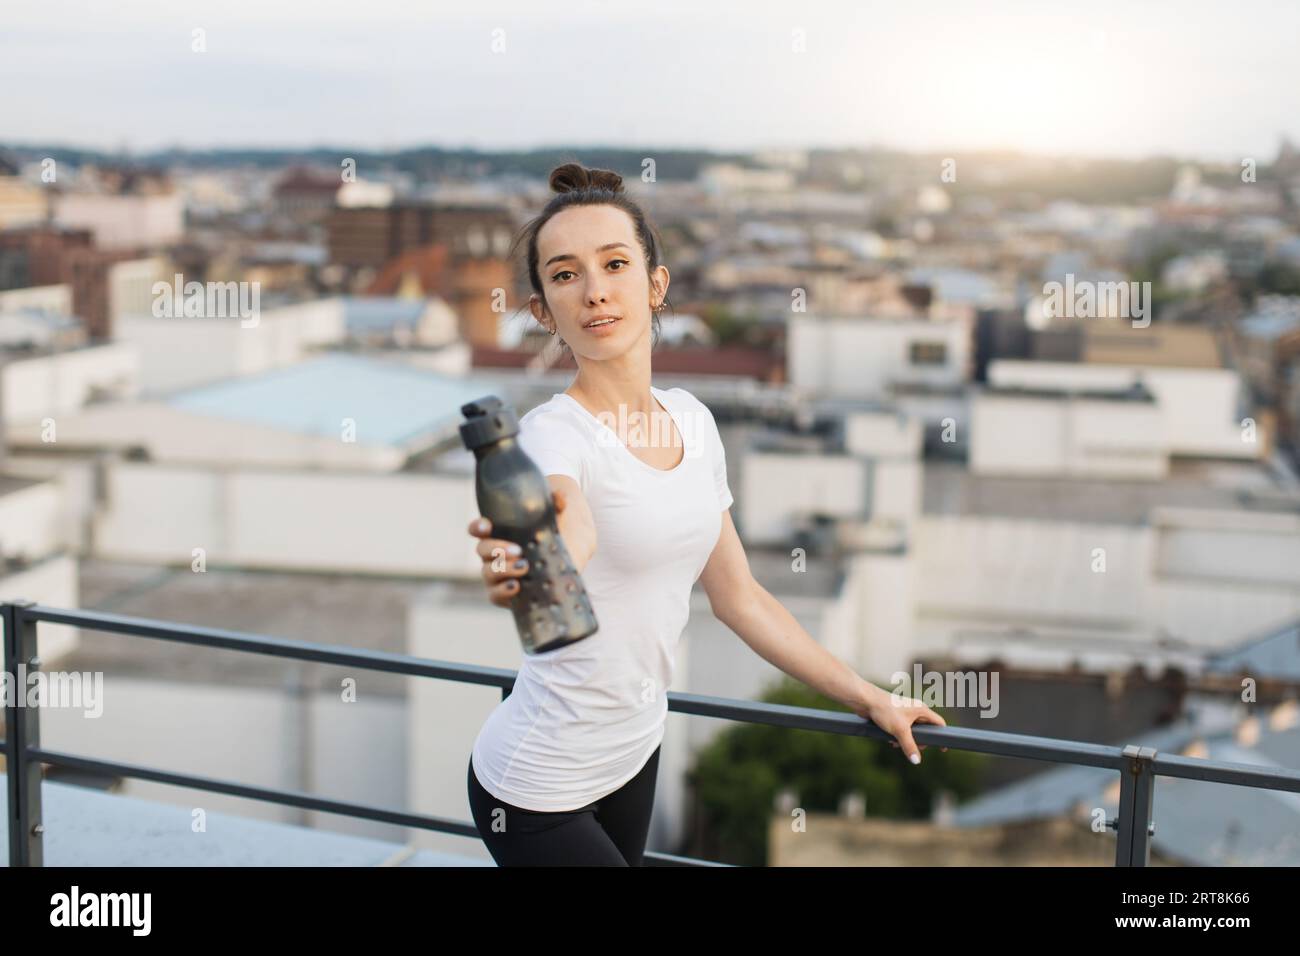 Lady in activewear reaching out sports bottle on roof Stock Photo